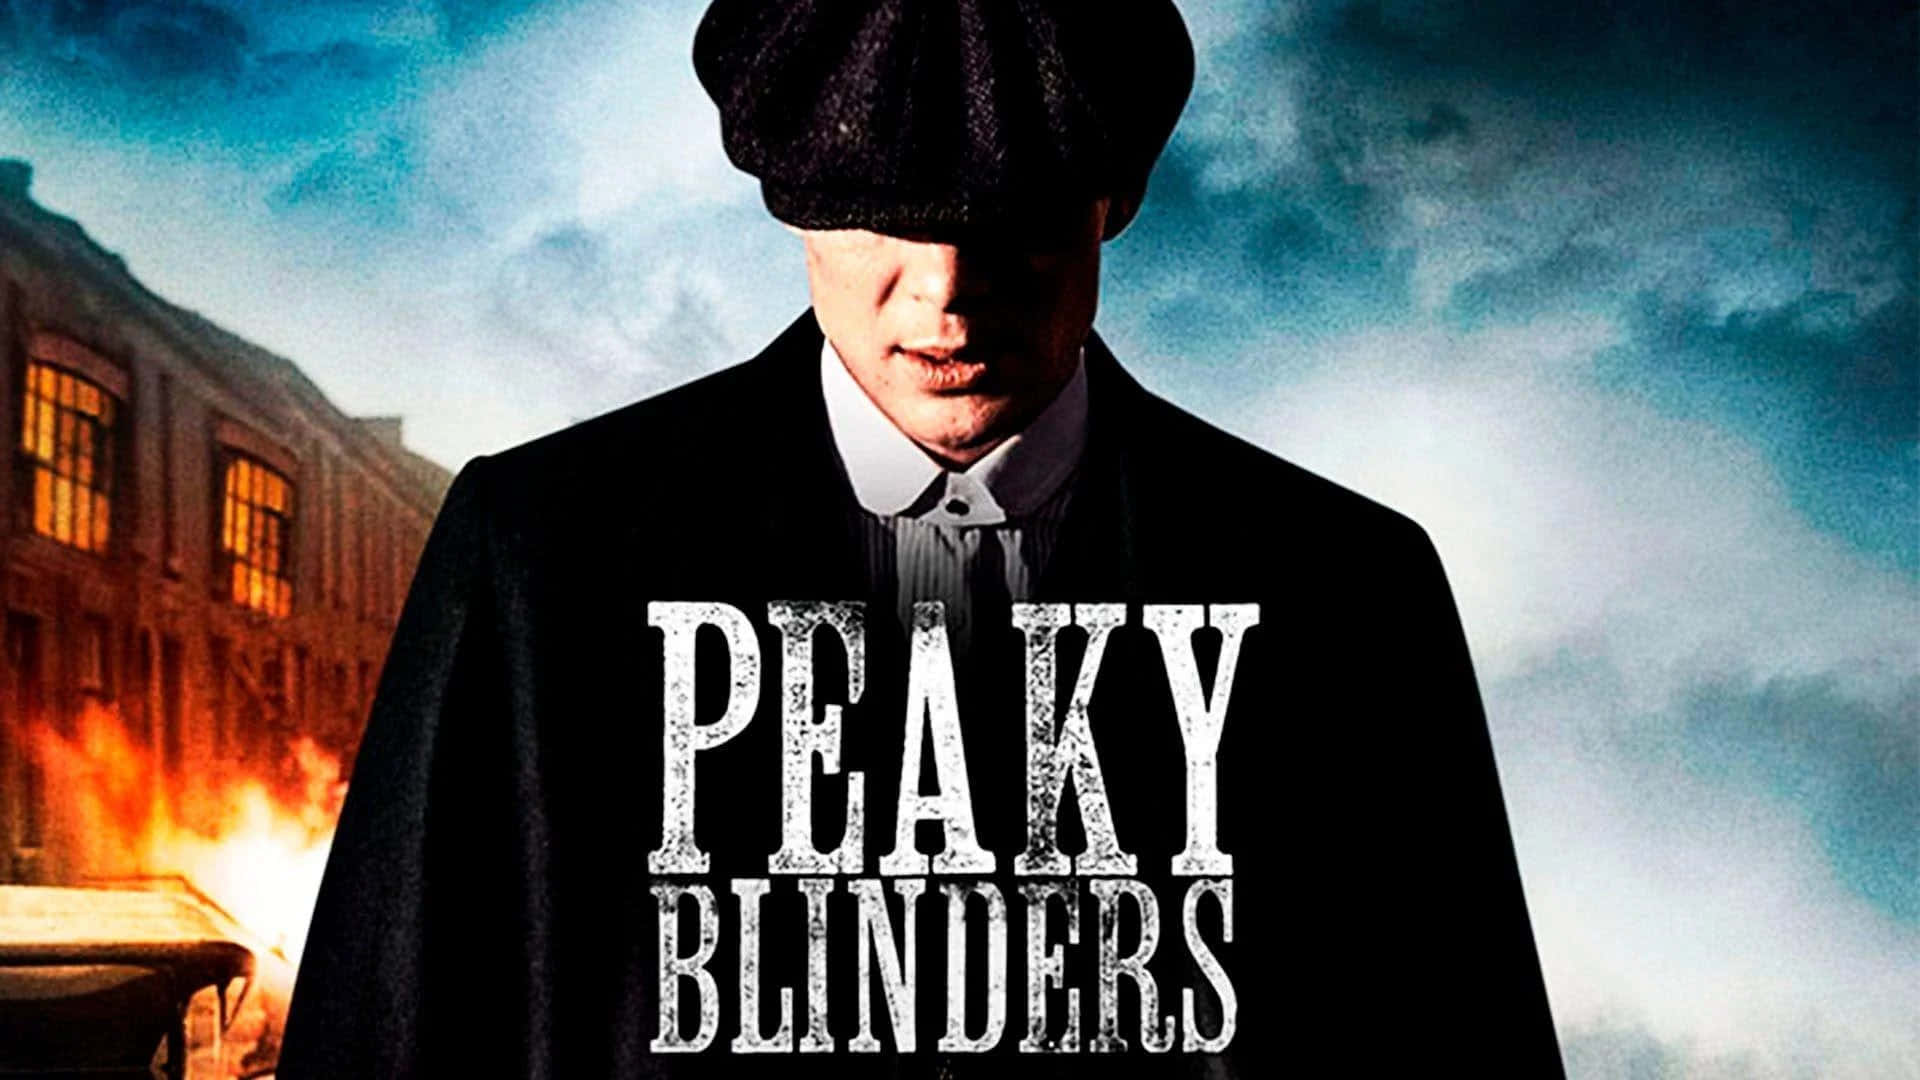 A Poster For Peaky Blinders